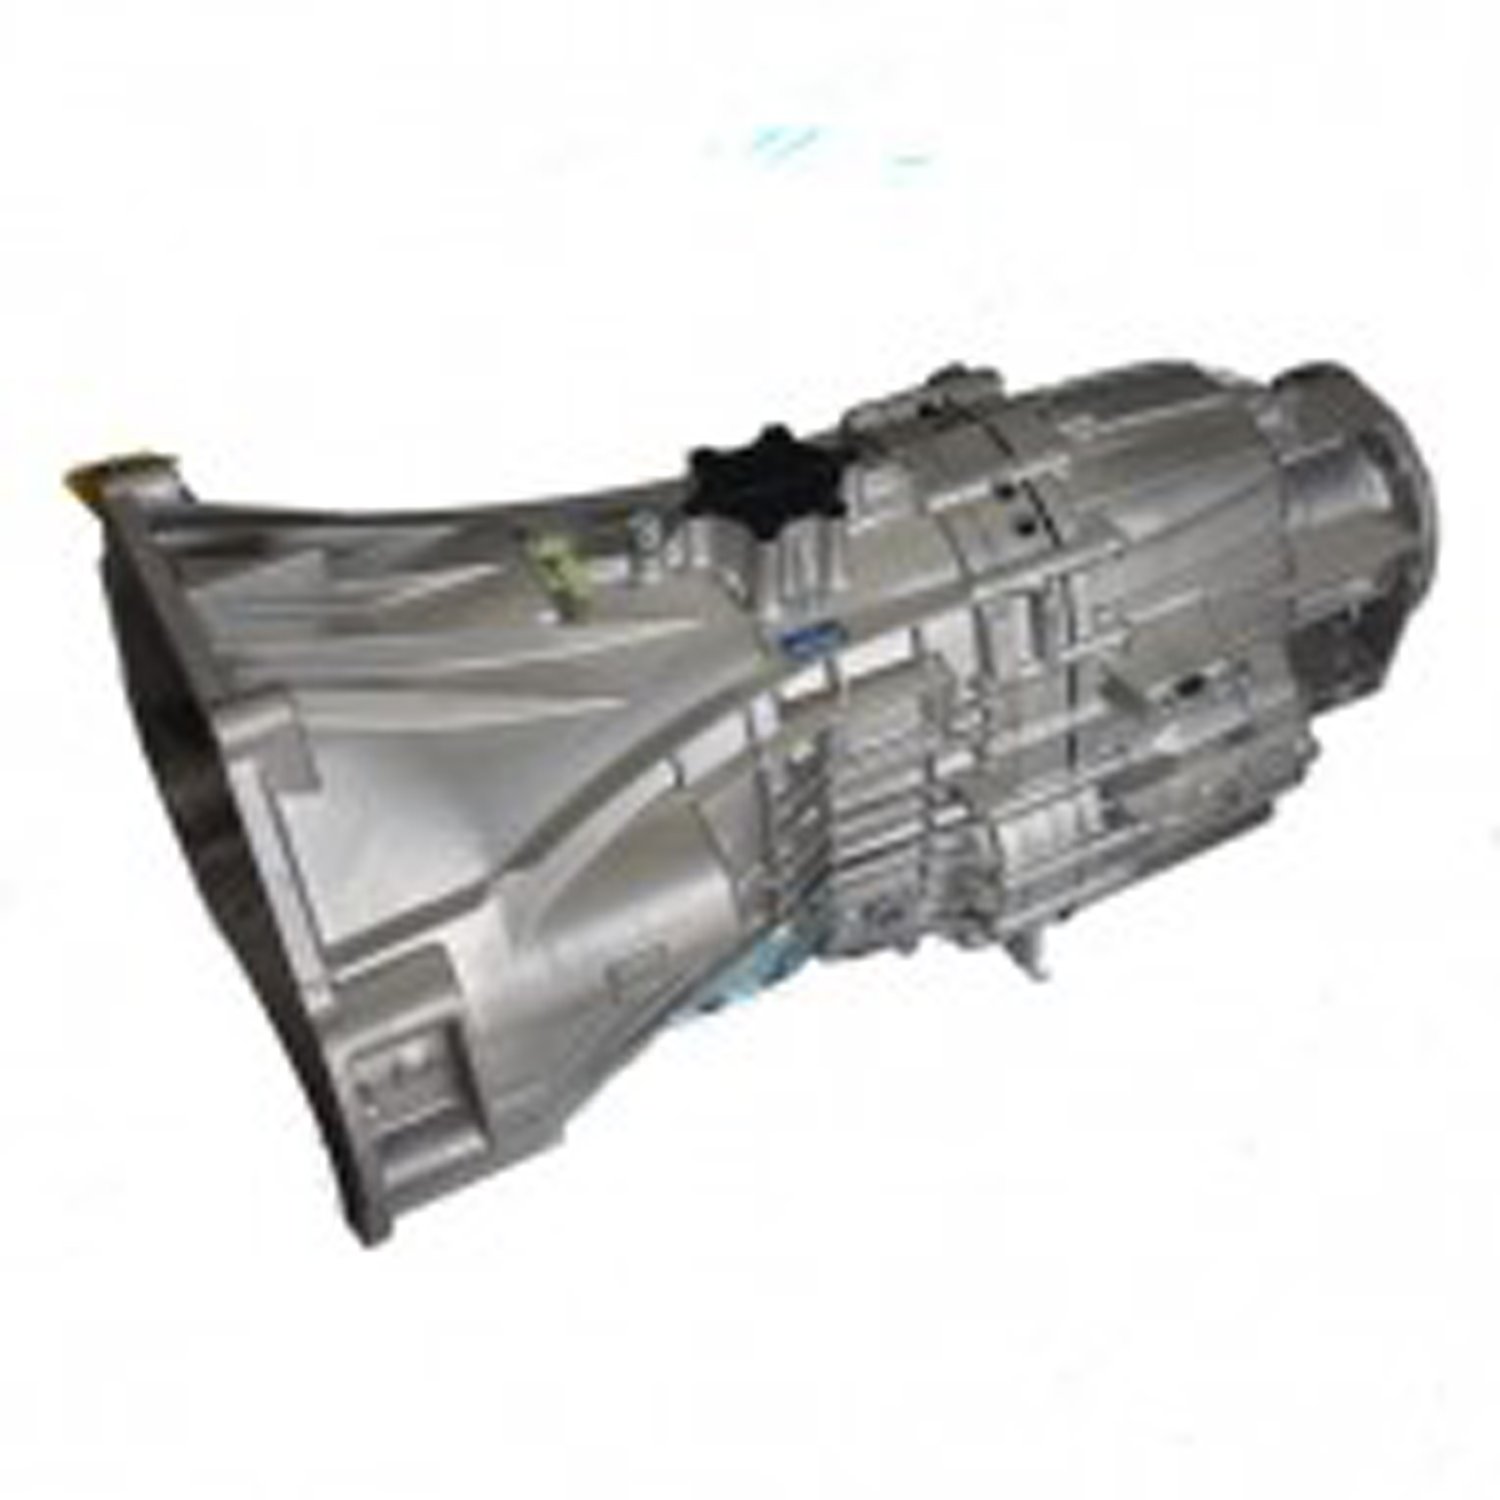 Remanufactured S6-S650F Manual Transmission for Ford 03-09 F-series 5.4L & 6.8L, 6 Speed